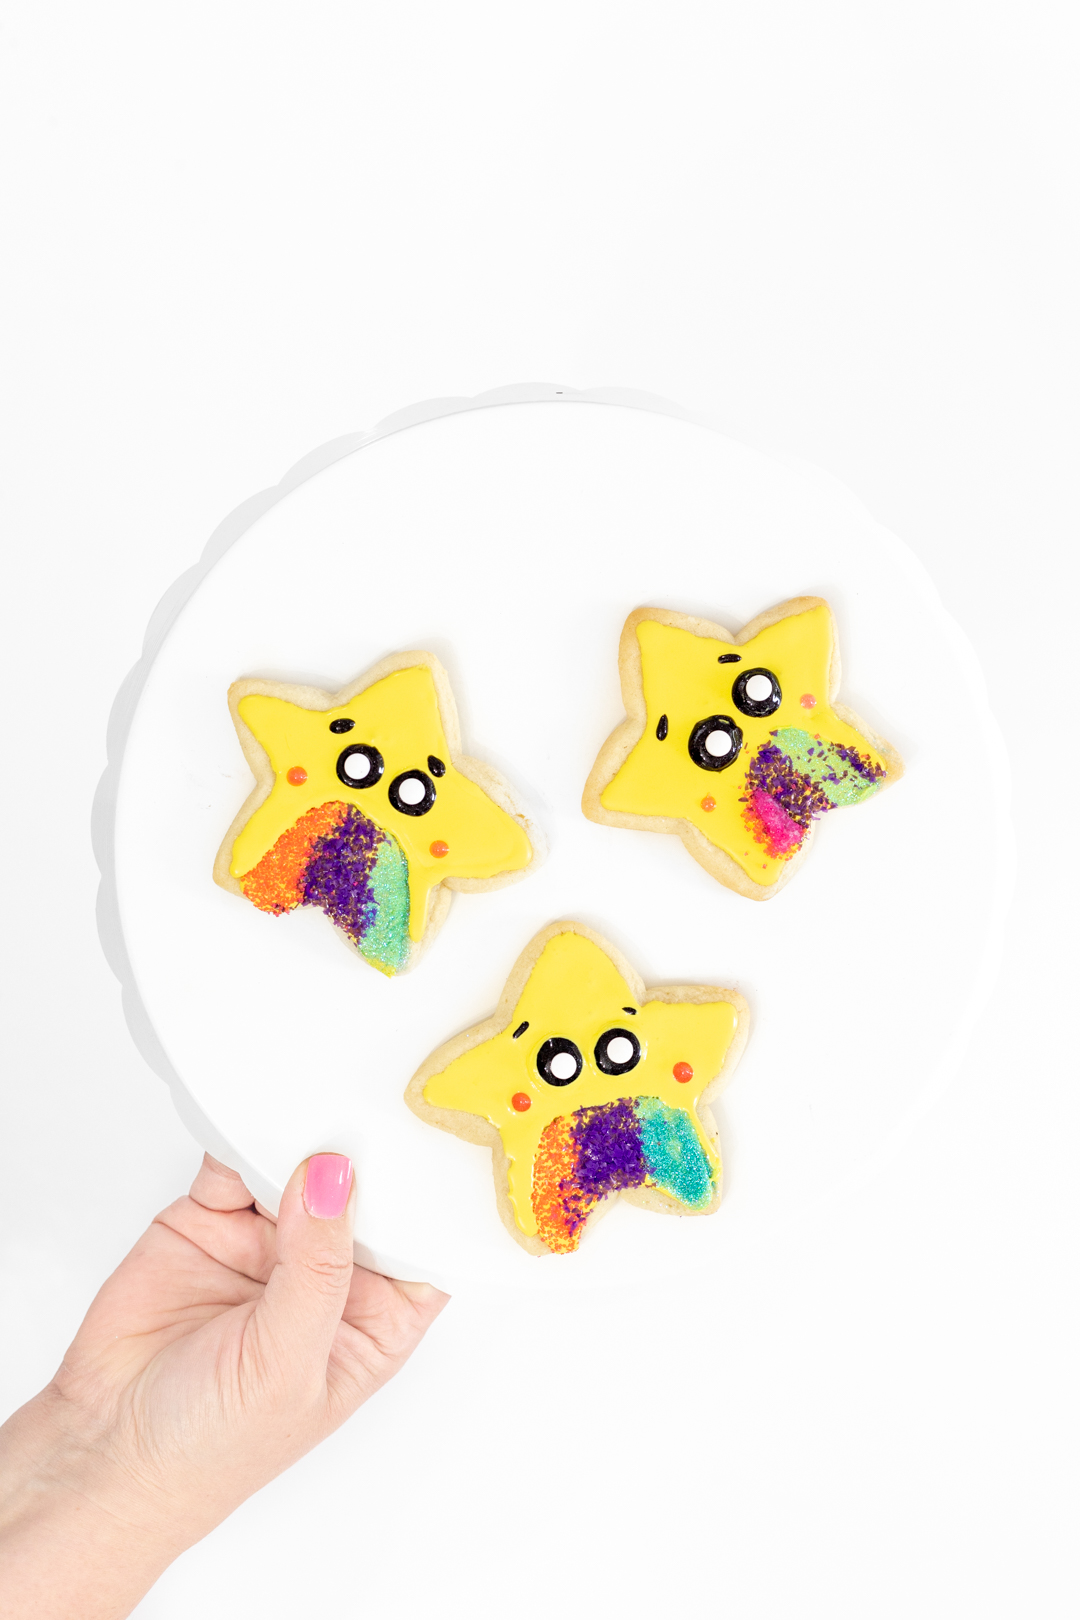 star cookies with yellow icing and colorful sprinkles